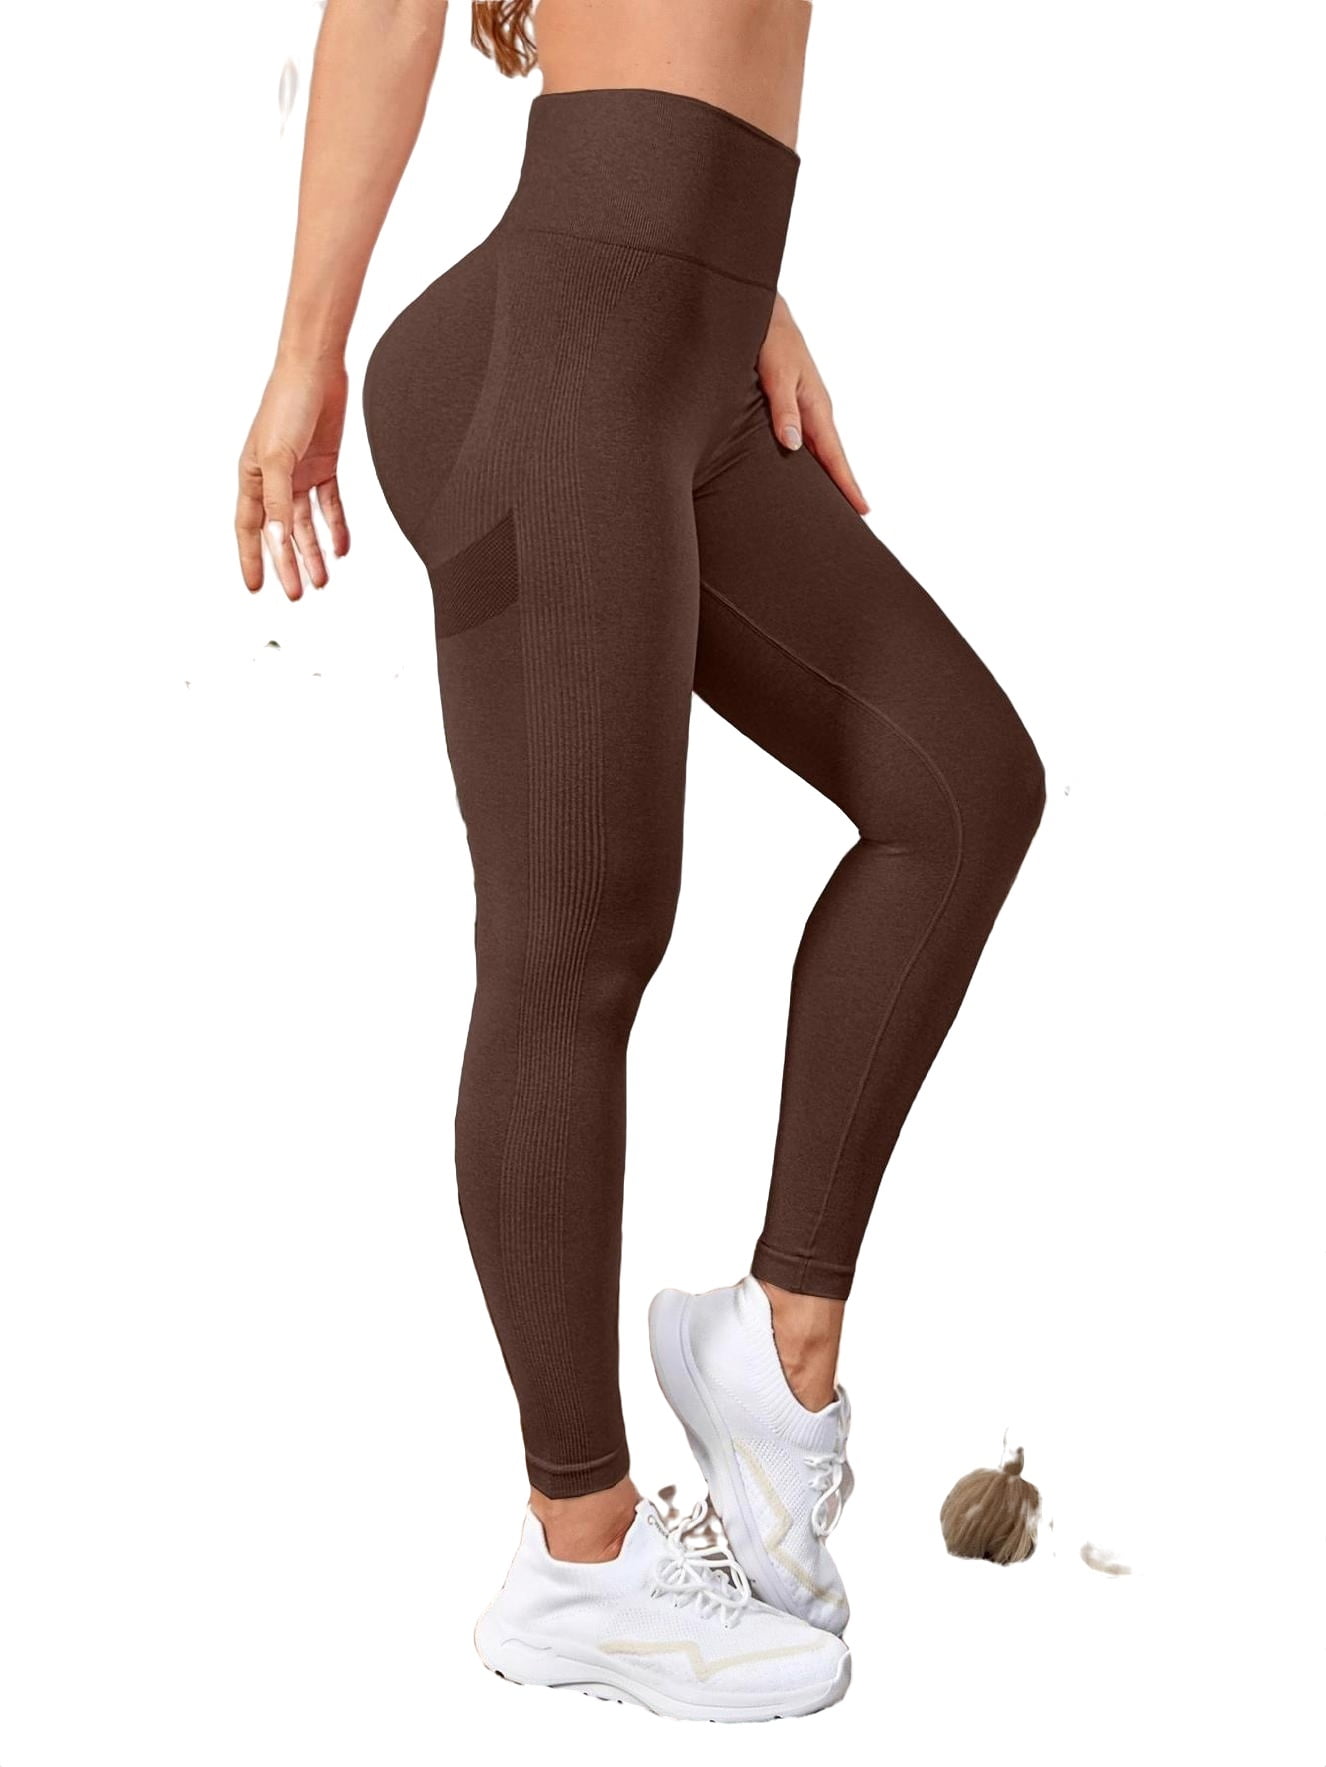 Briar V Back Leggings With Pockets - Dark Chocolate | Active wear tops,  Activewear fashion, Crop tops